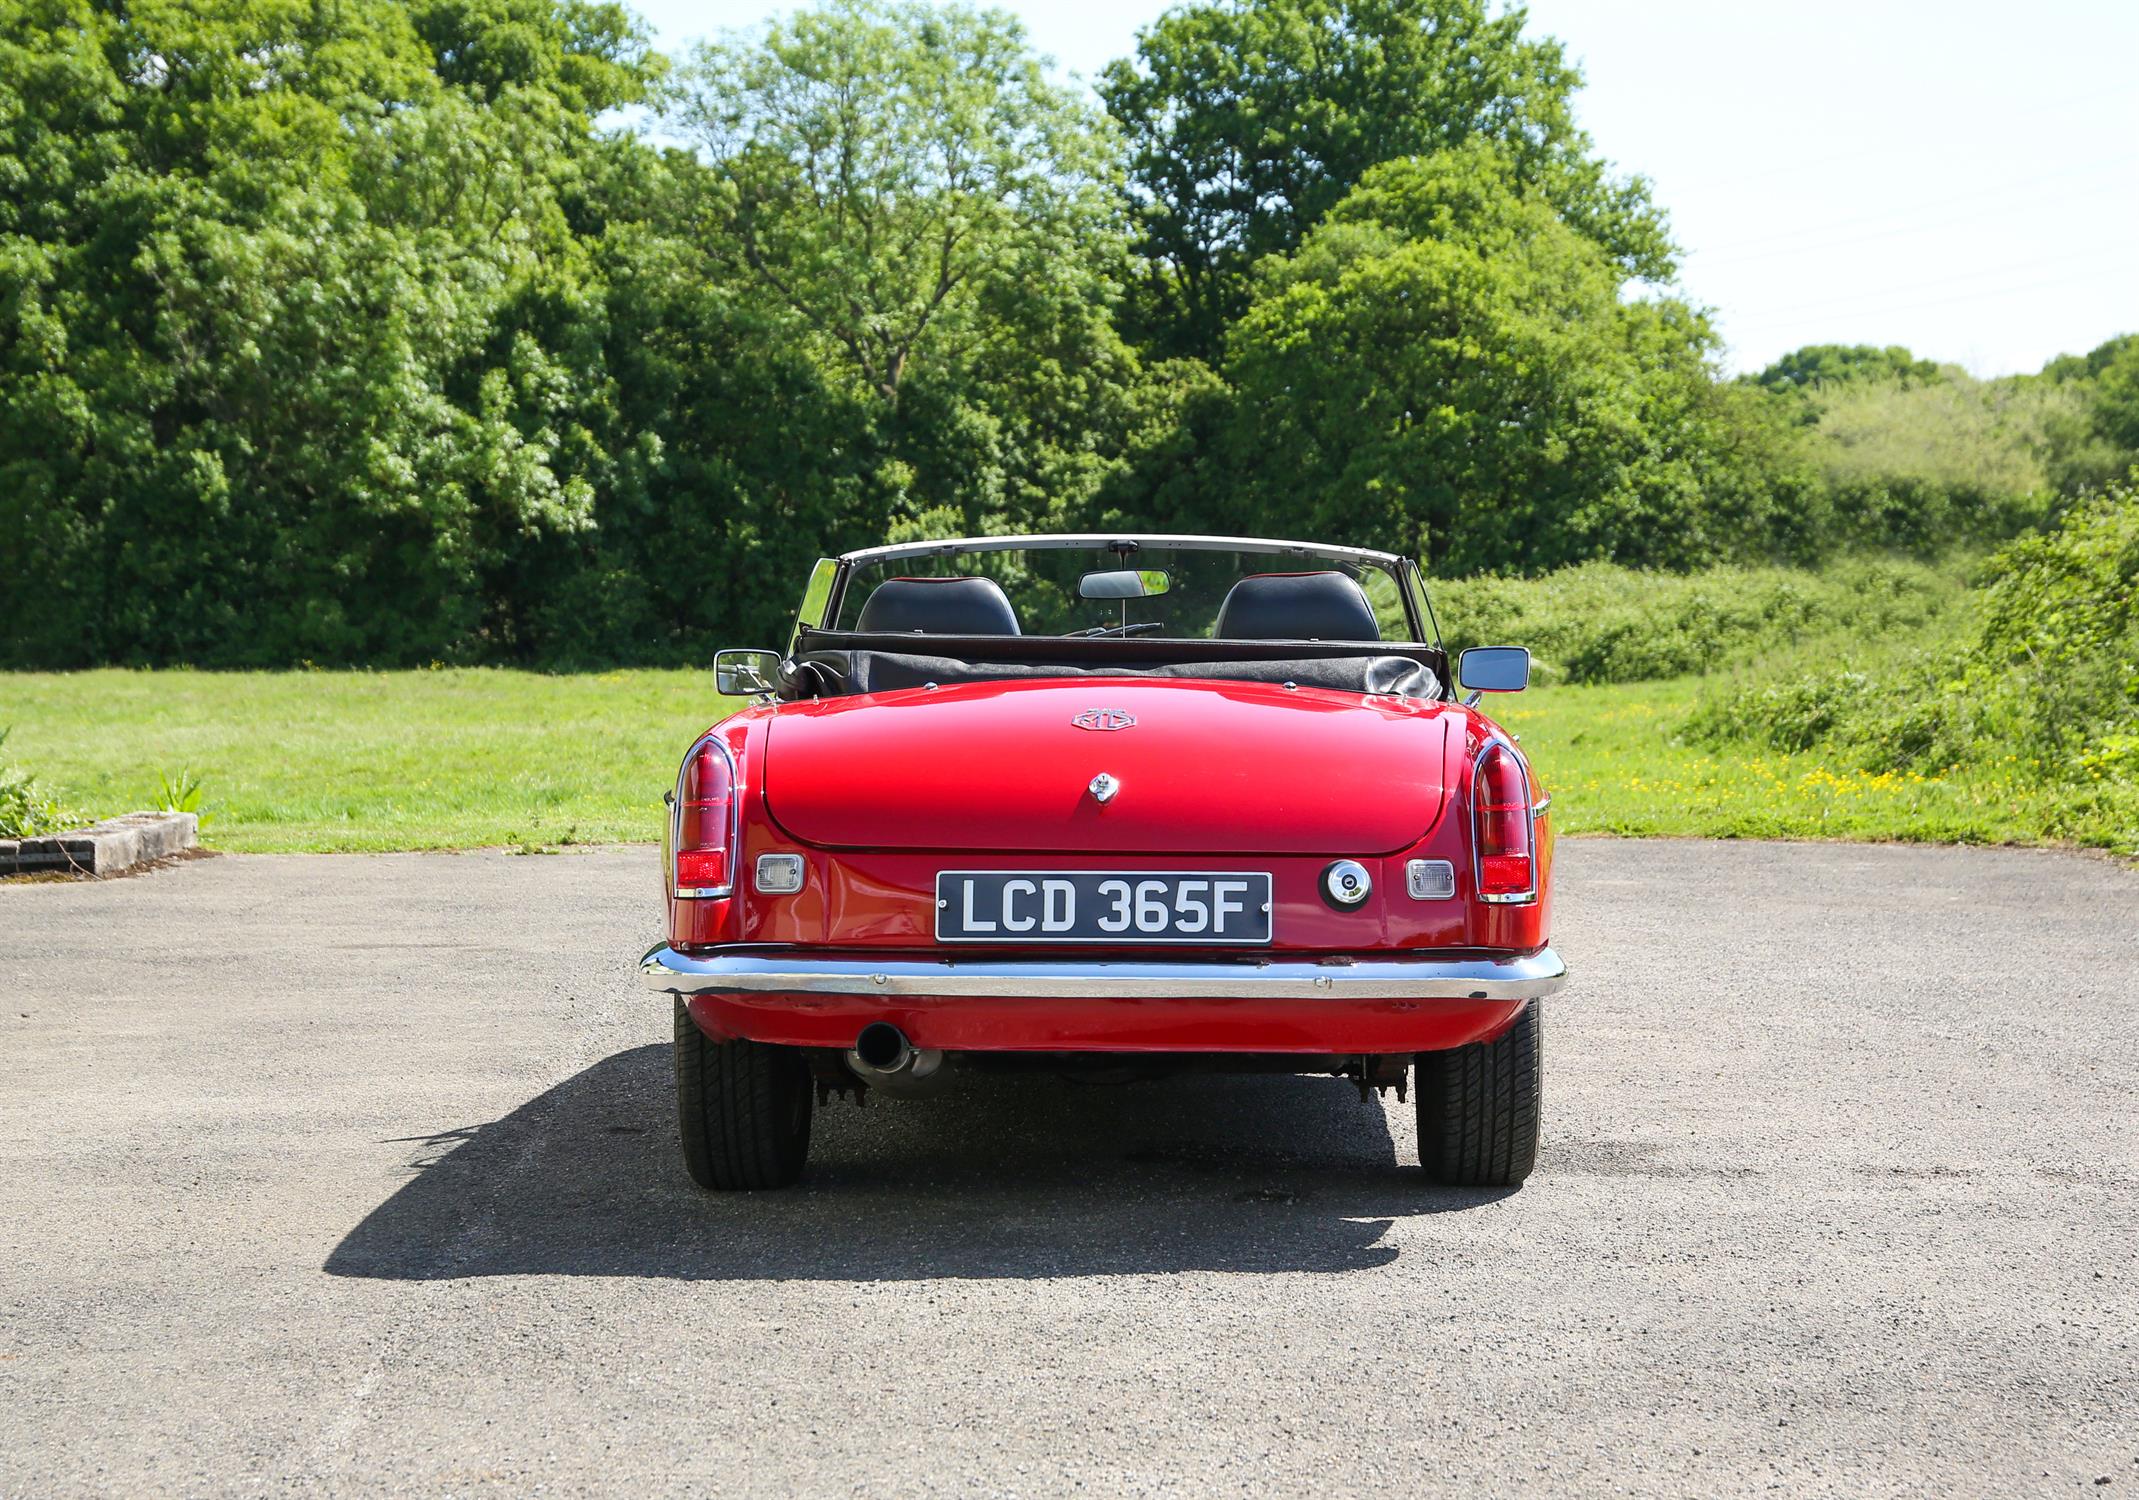 1968 MGB. Registration number LCD 365F - Fully rebuilt in 1997, with major refurbishment in 2019 - Image 4 of 6